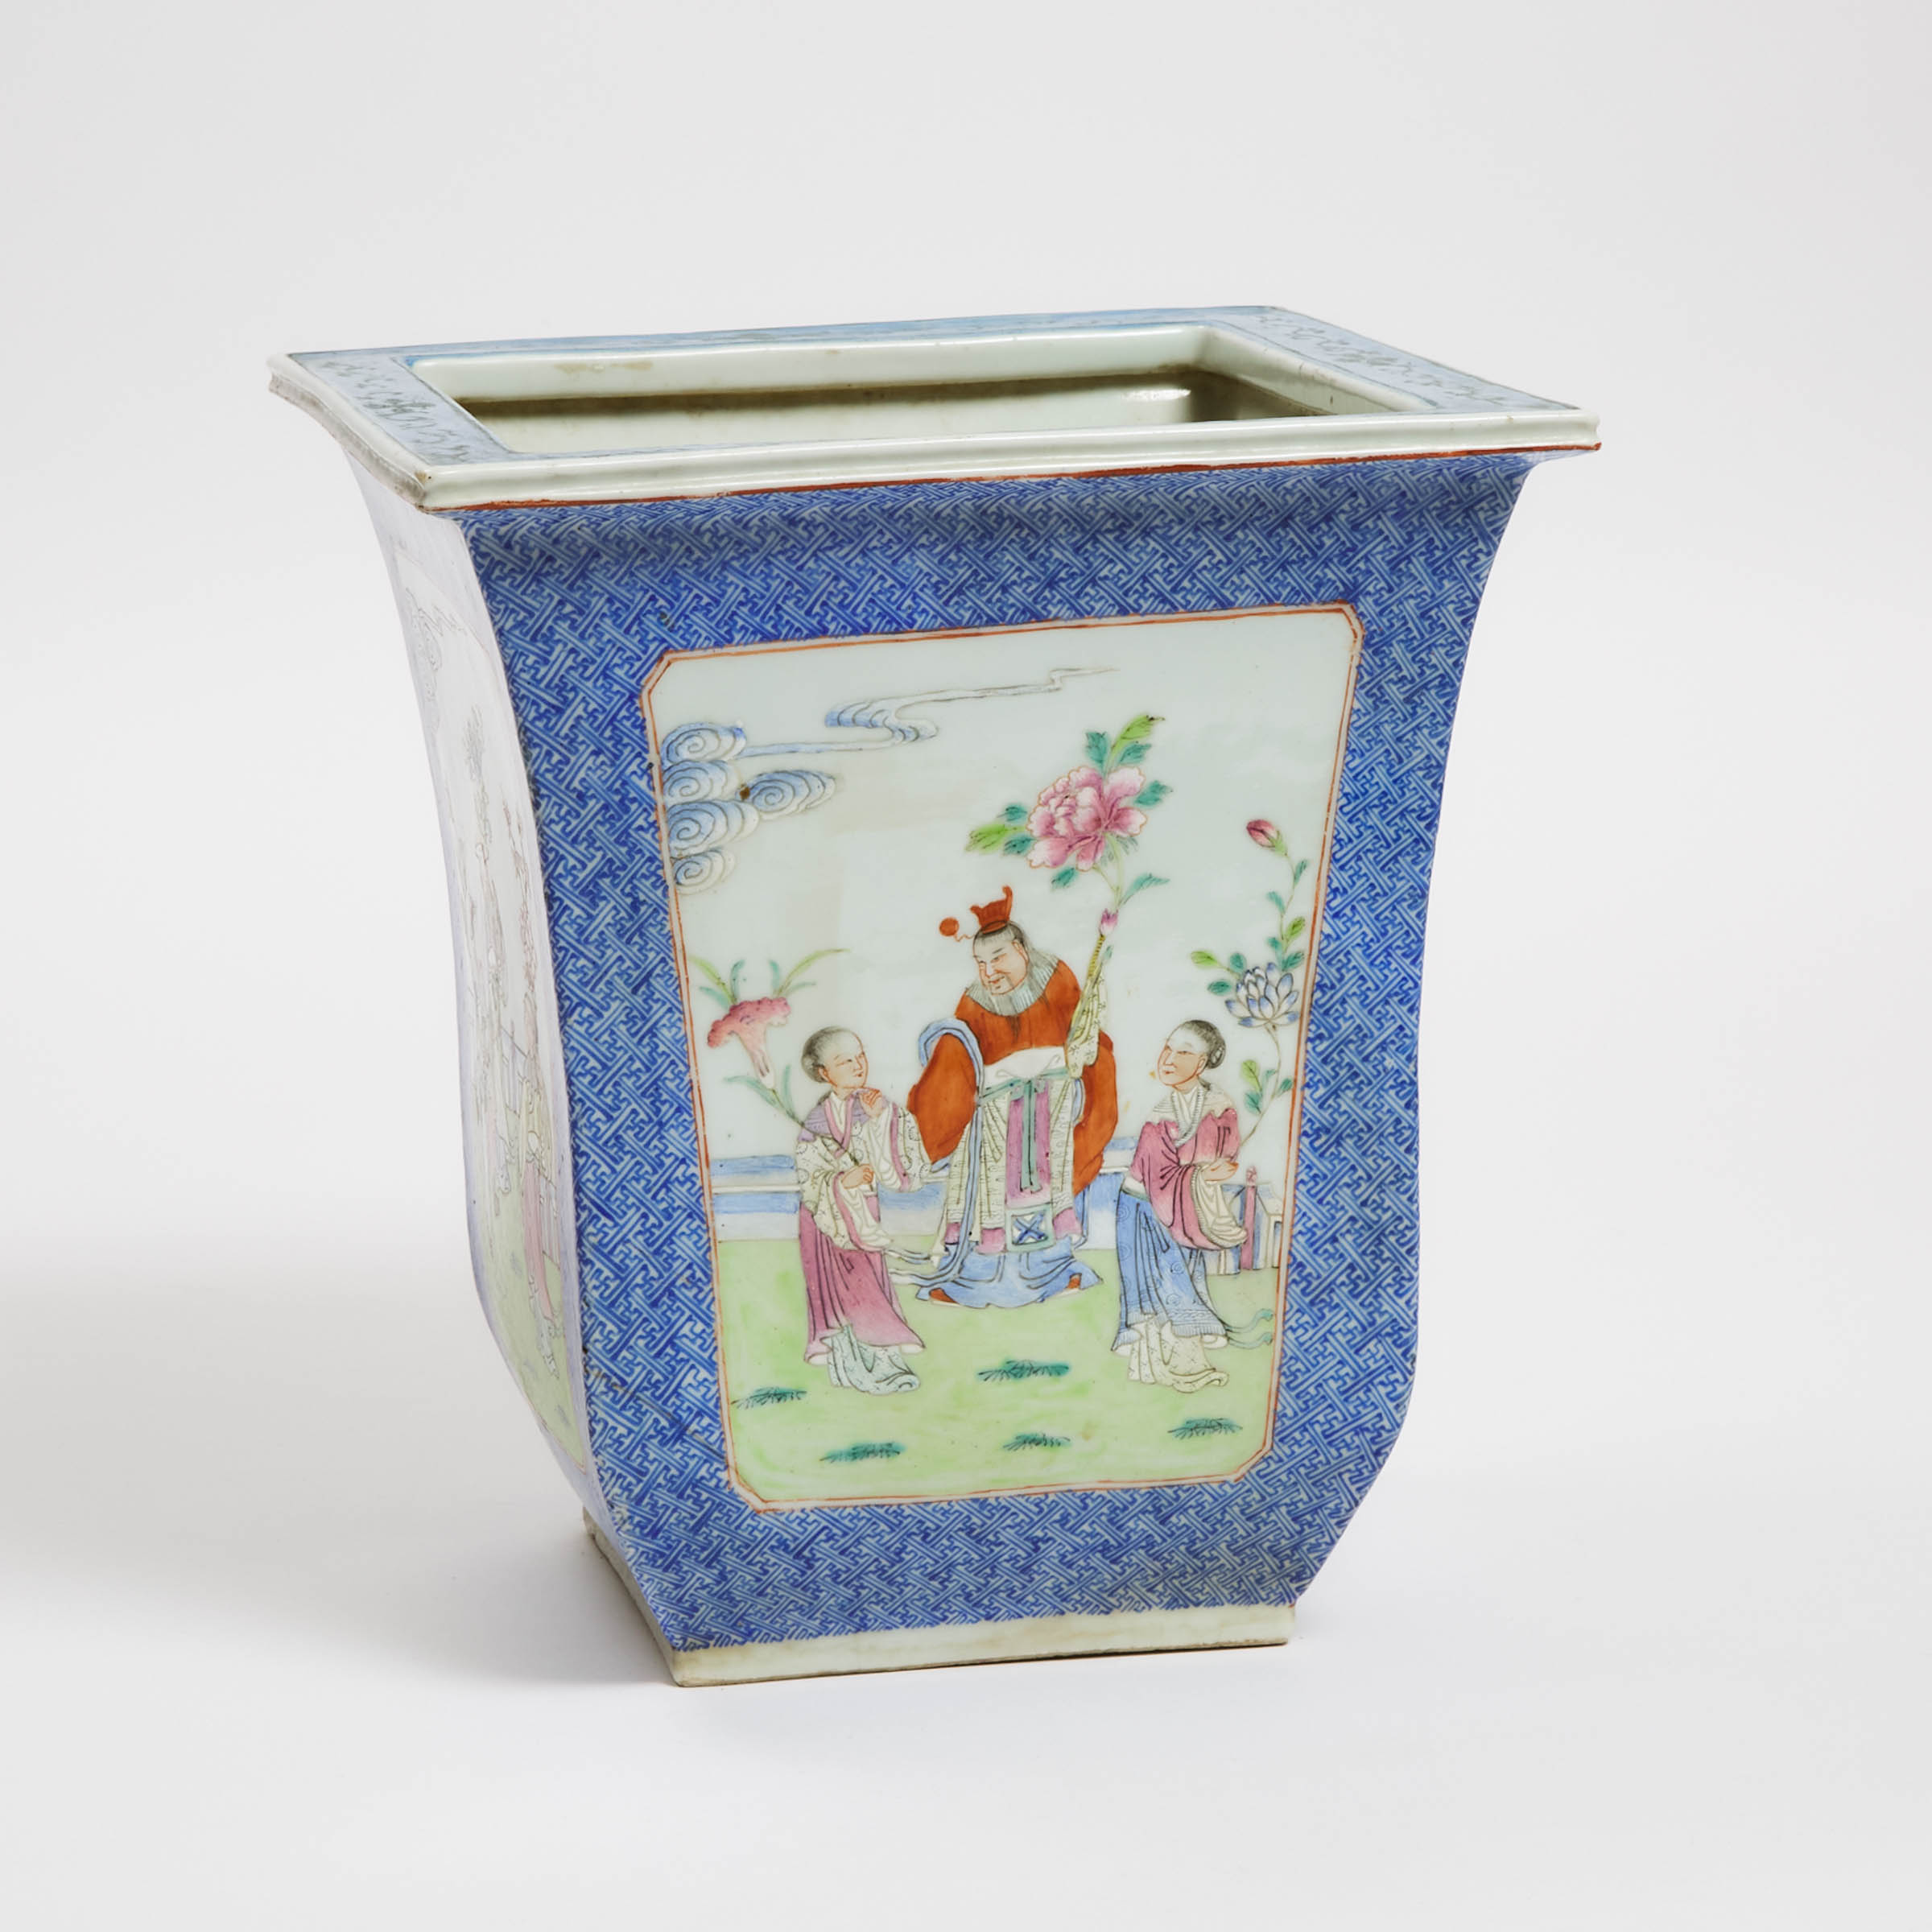 A Famille Rose and Iron-Red Decorated 'Zhong Kui' Jardinière, Tongzhi Period (1862-1874)